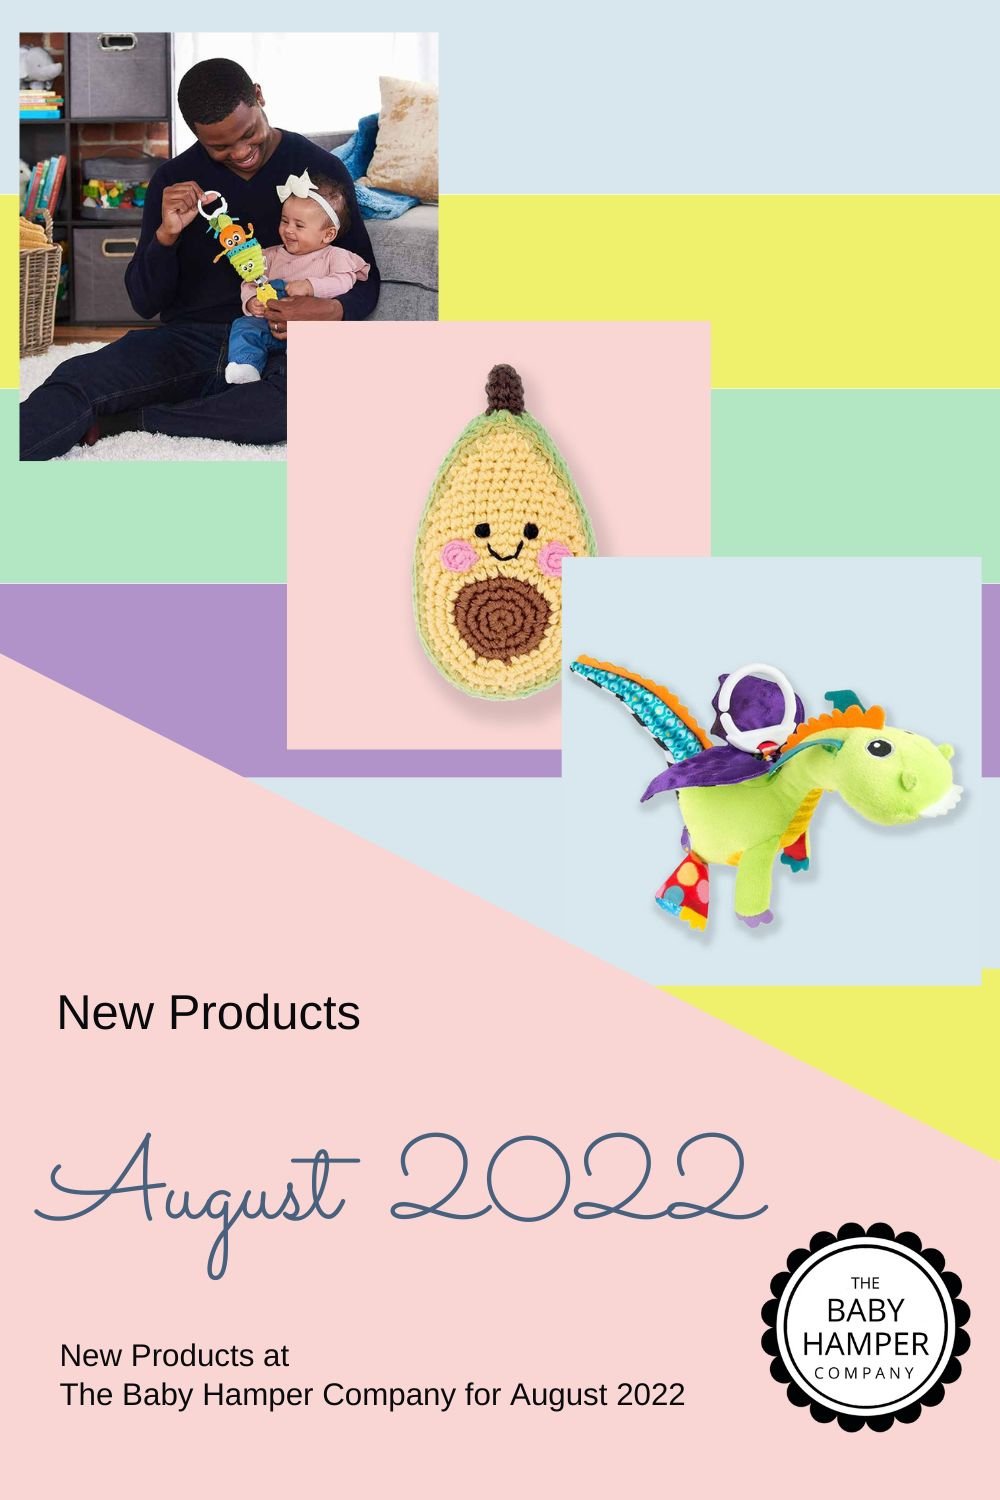 New Products at The Baby Hamper Company for August 2022